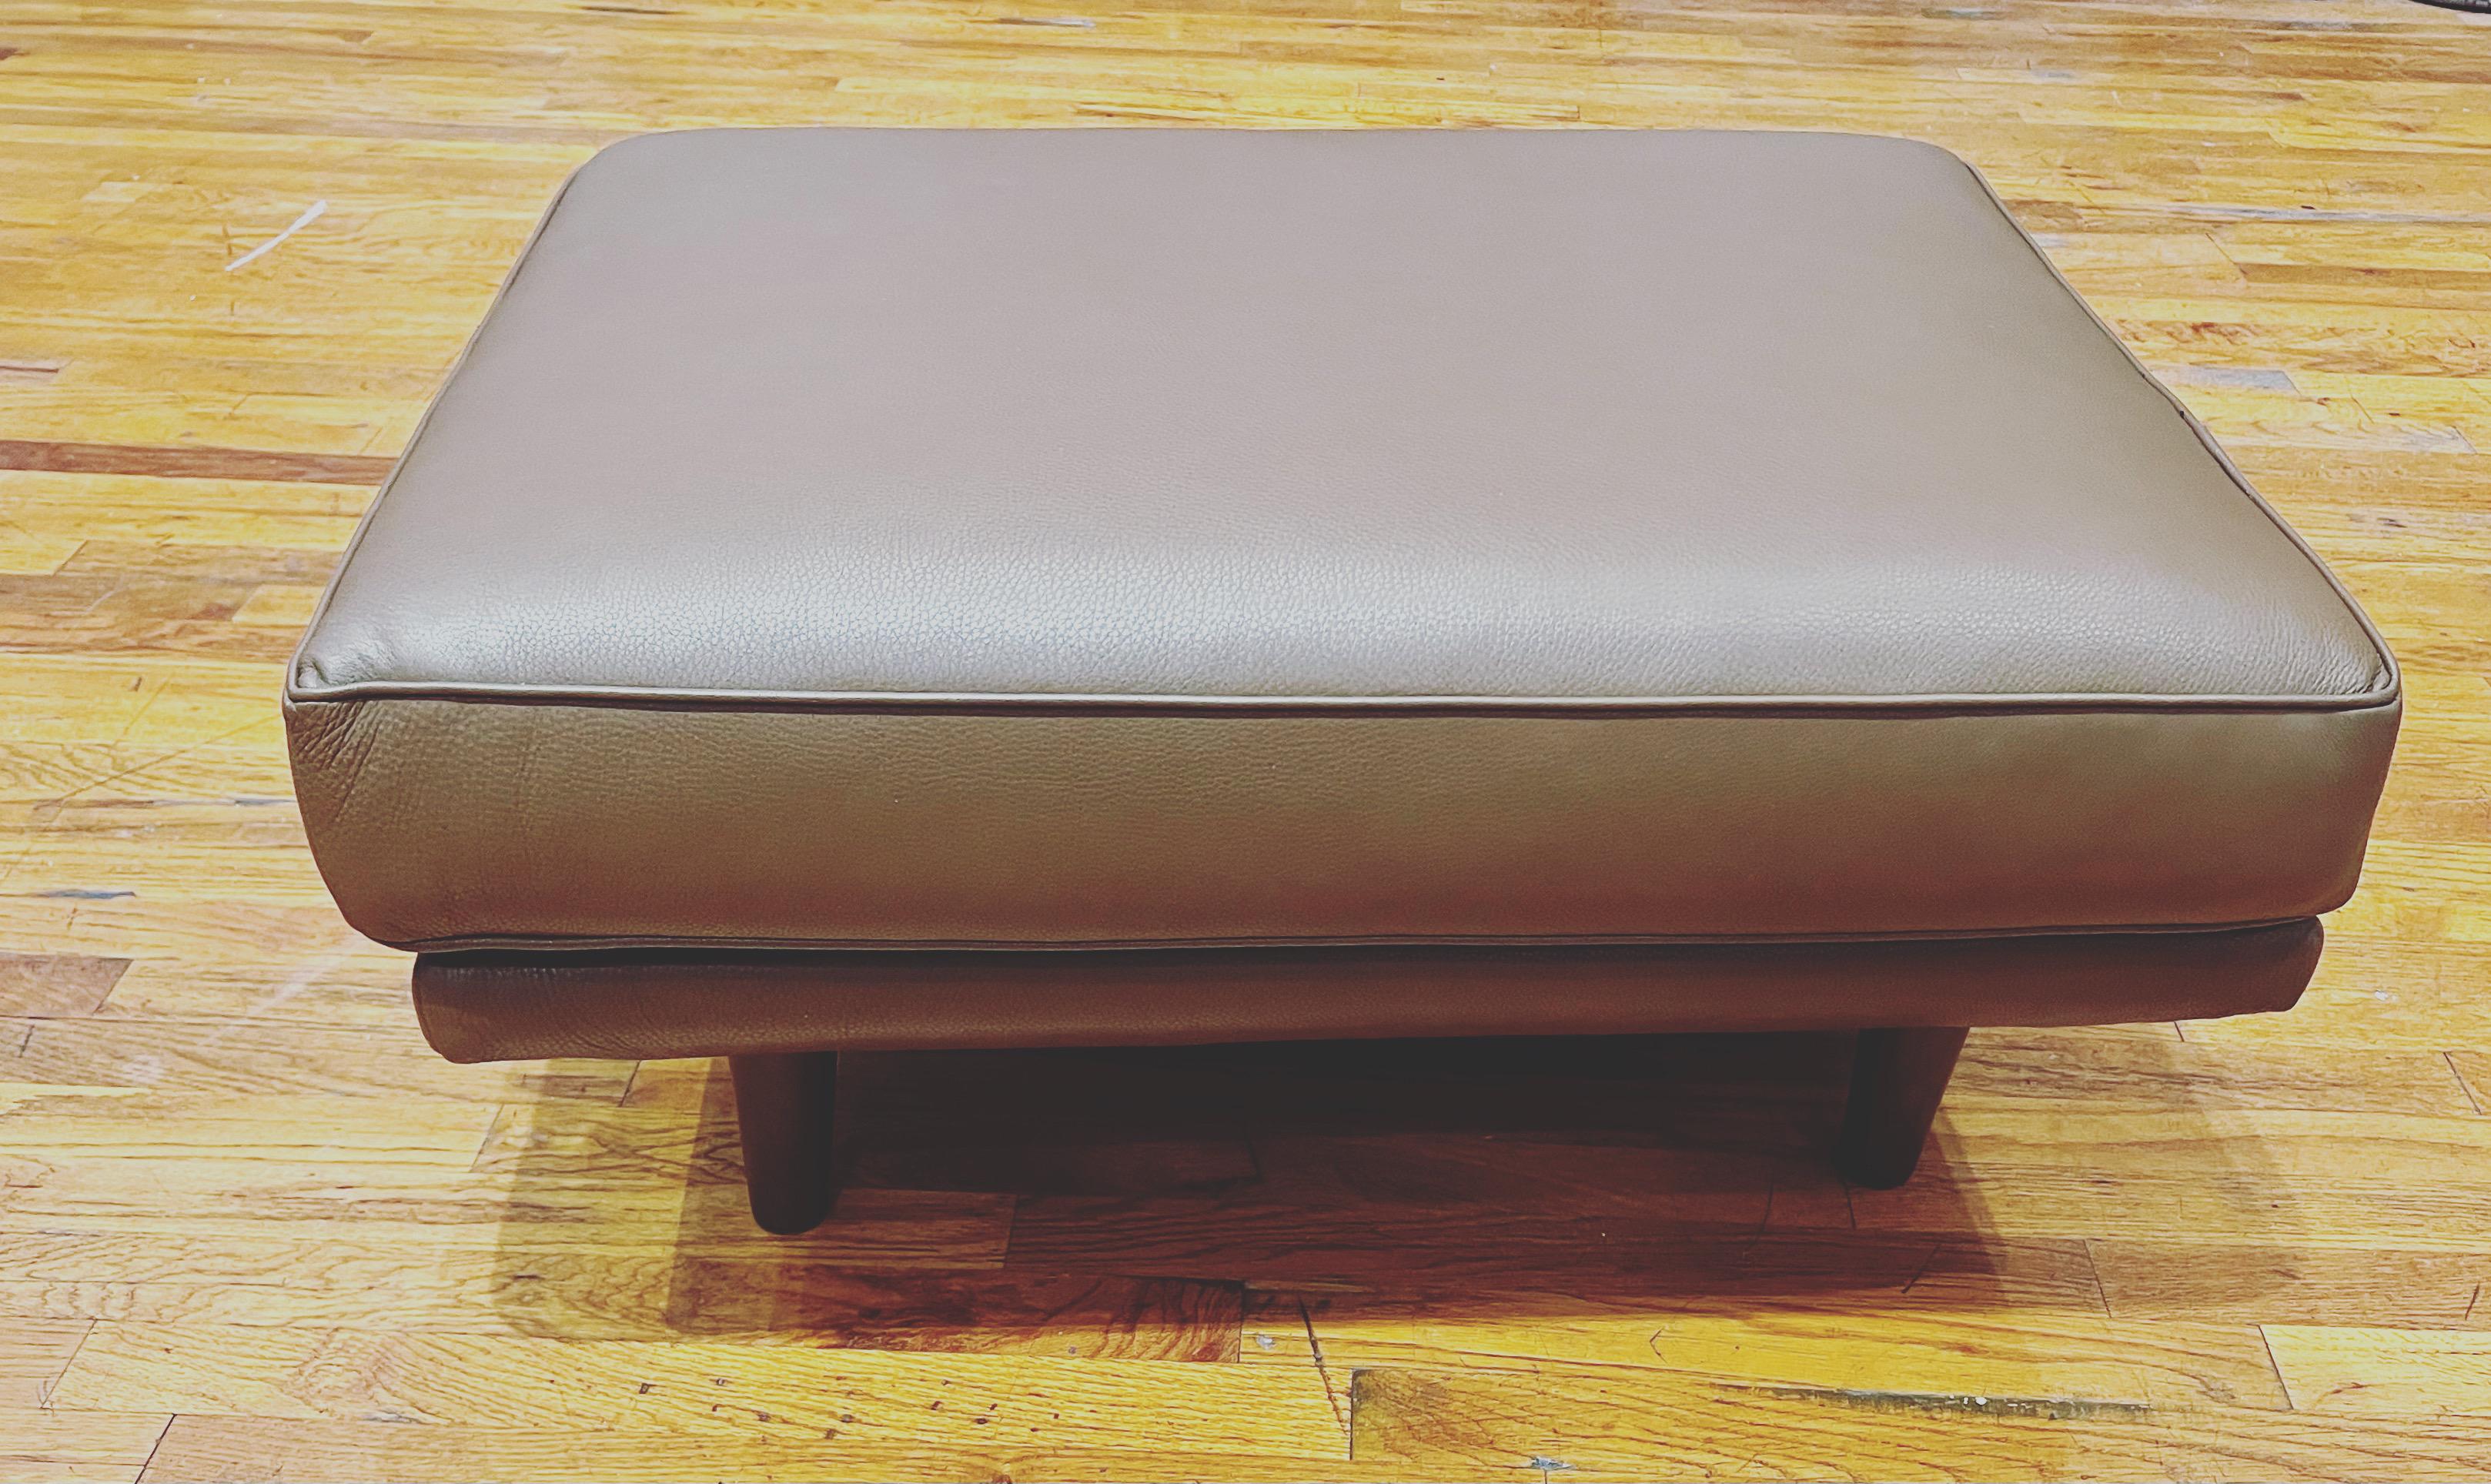 Beautiful high-quality ottoman top grade leather, this item was ordered for a project and never used great quality with solid walnut tapered removable legs.